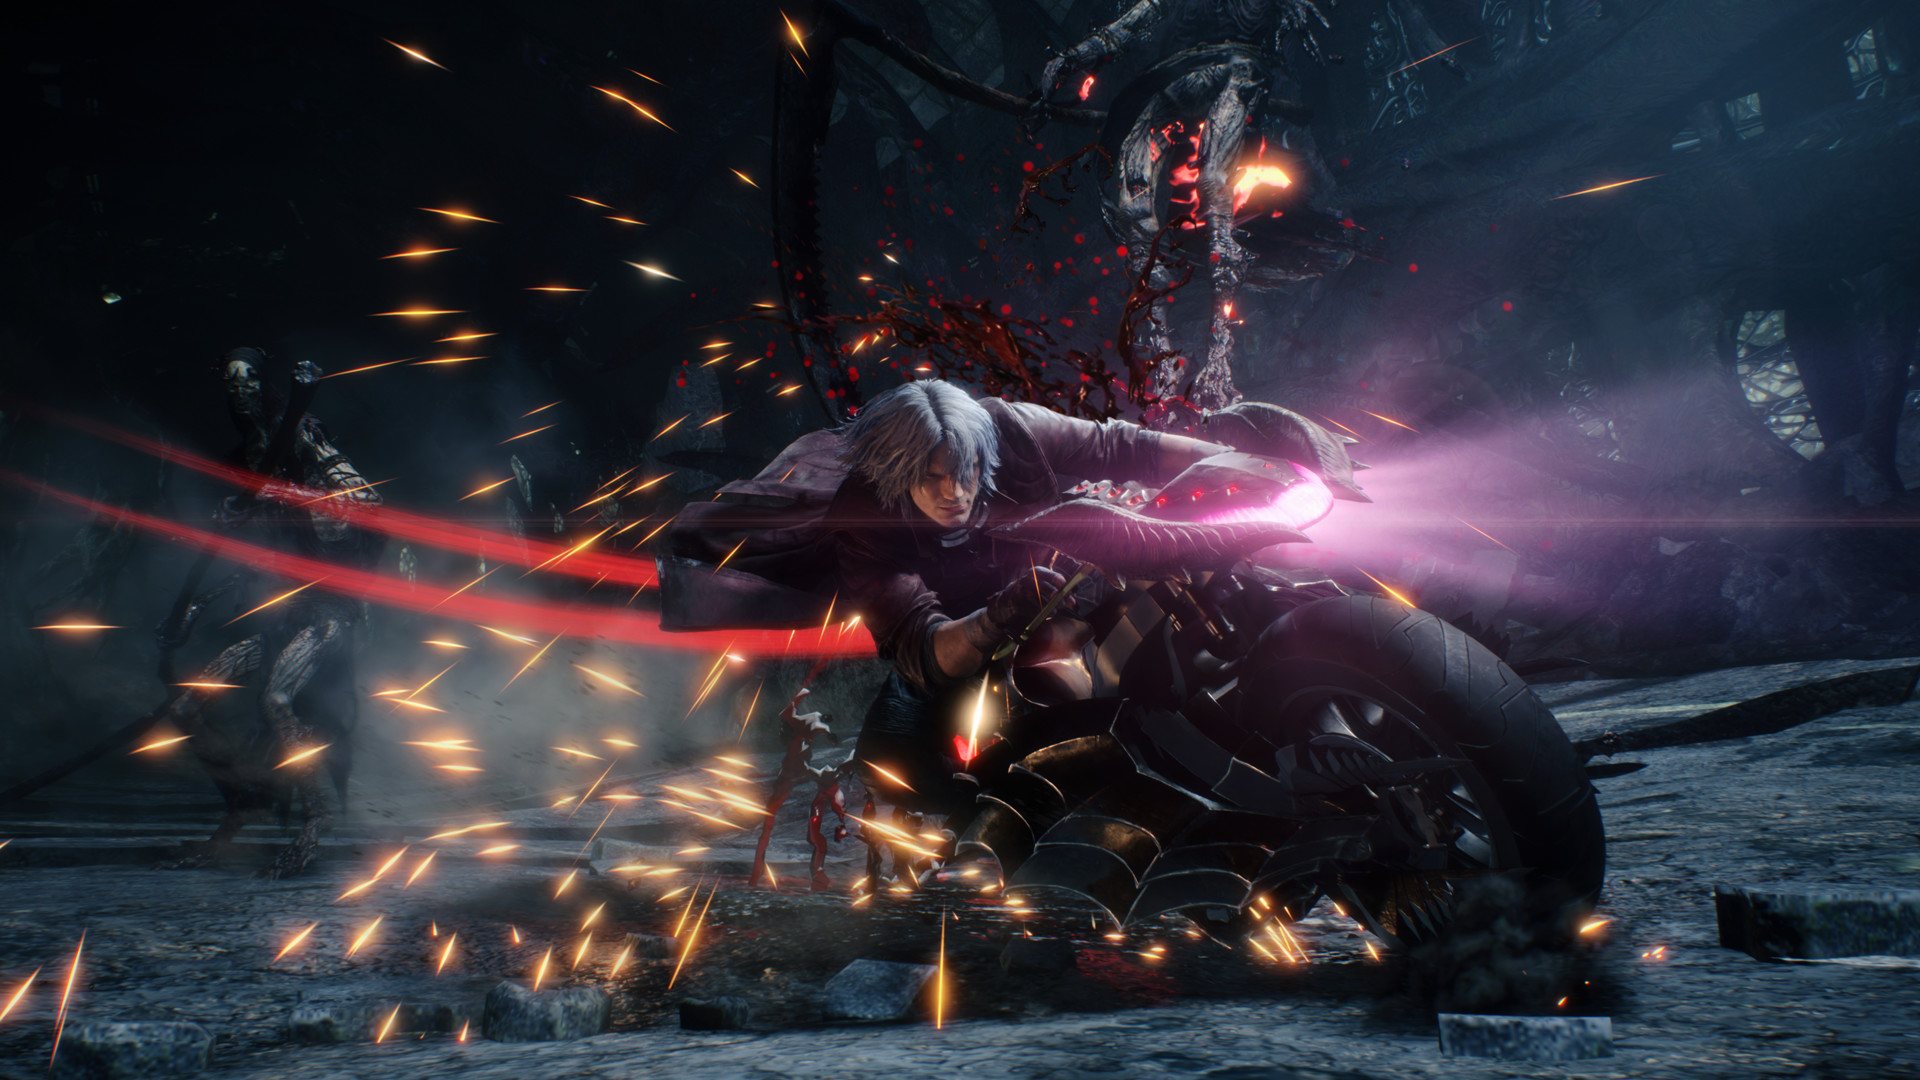 Devil May Cry 5 Deluxe Edition EU Steam CD Key